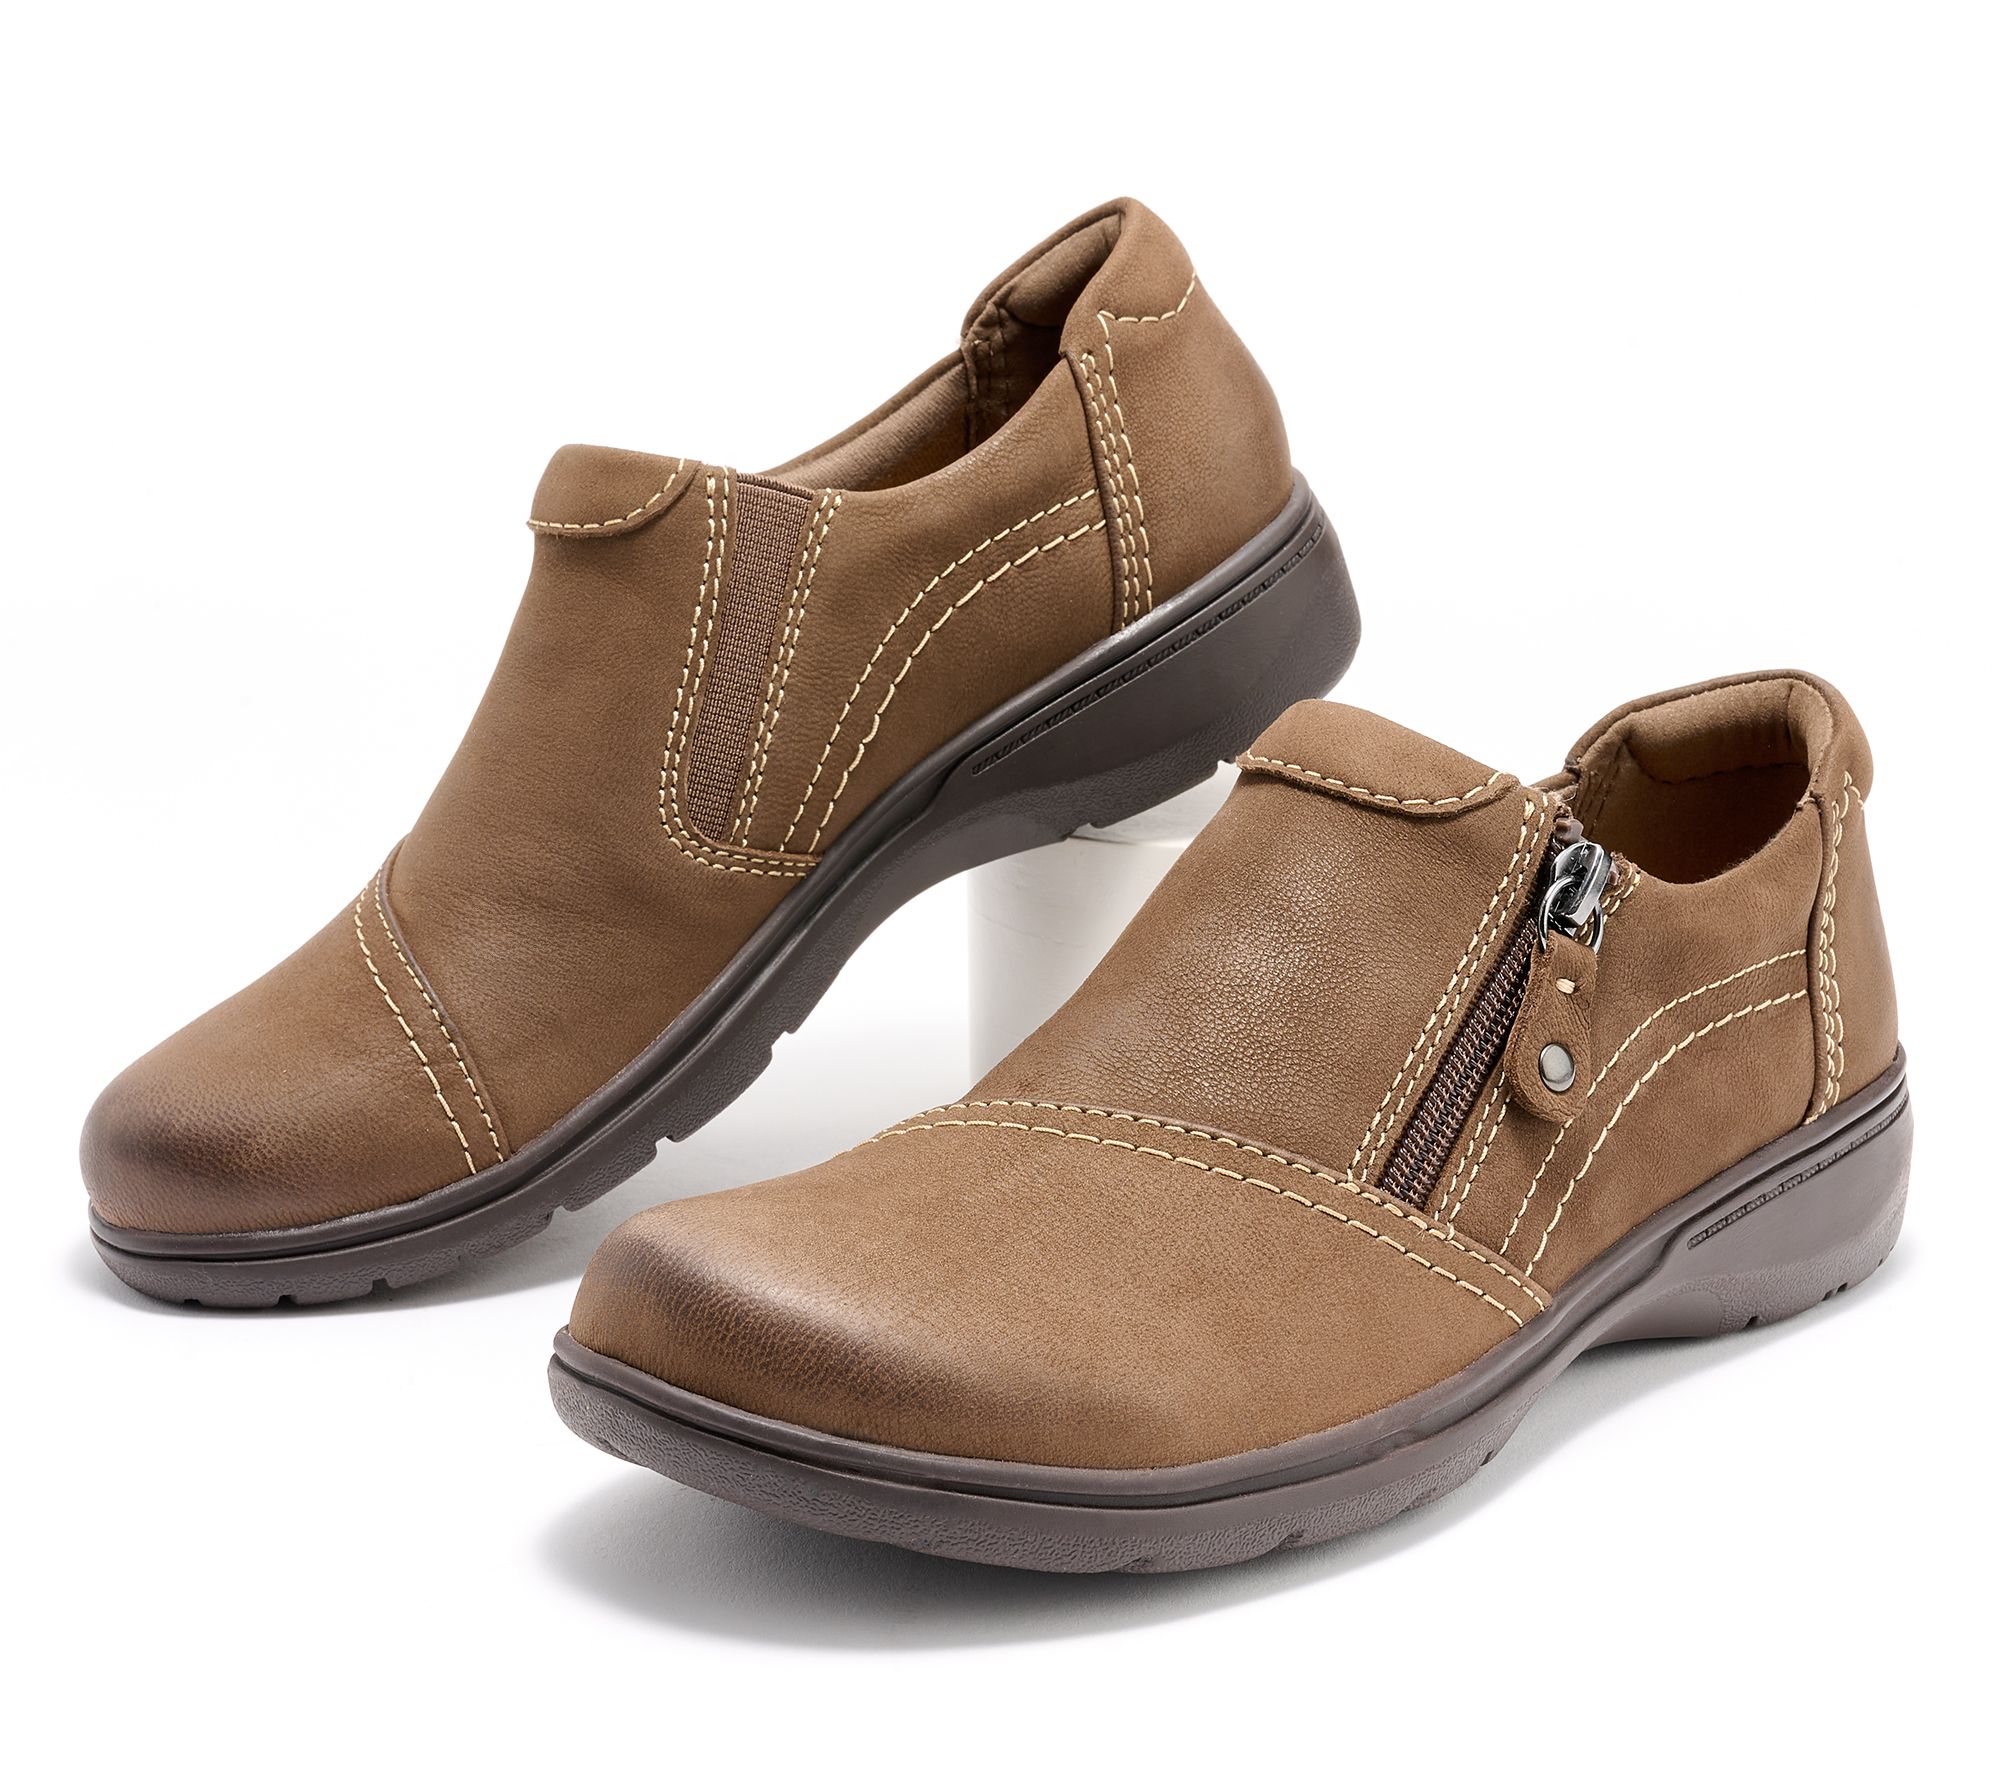 Clarks shoes sale: Save on men's and women's sandals, dress shoes and more